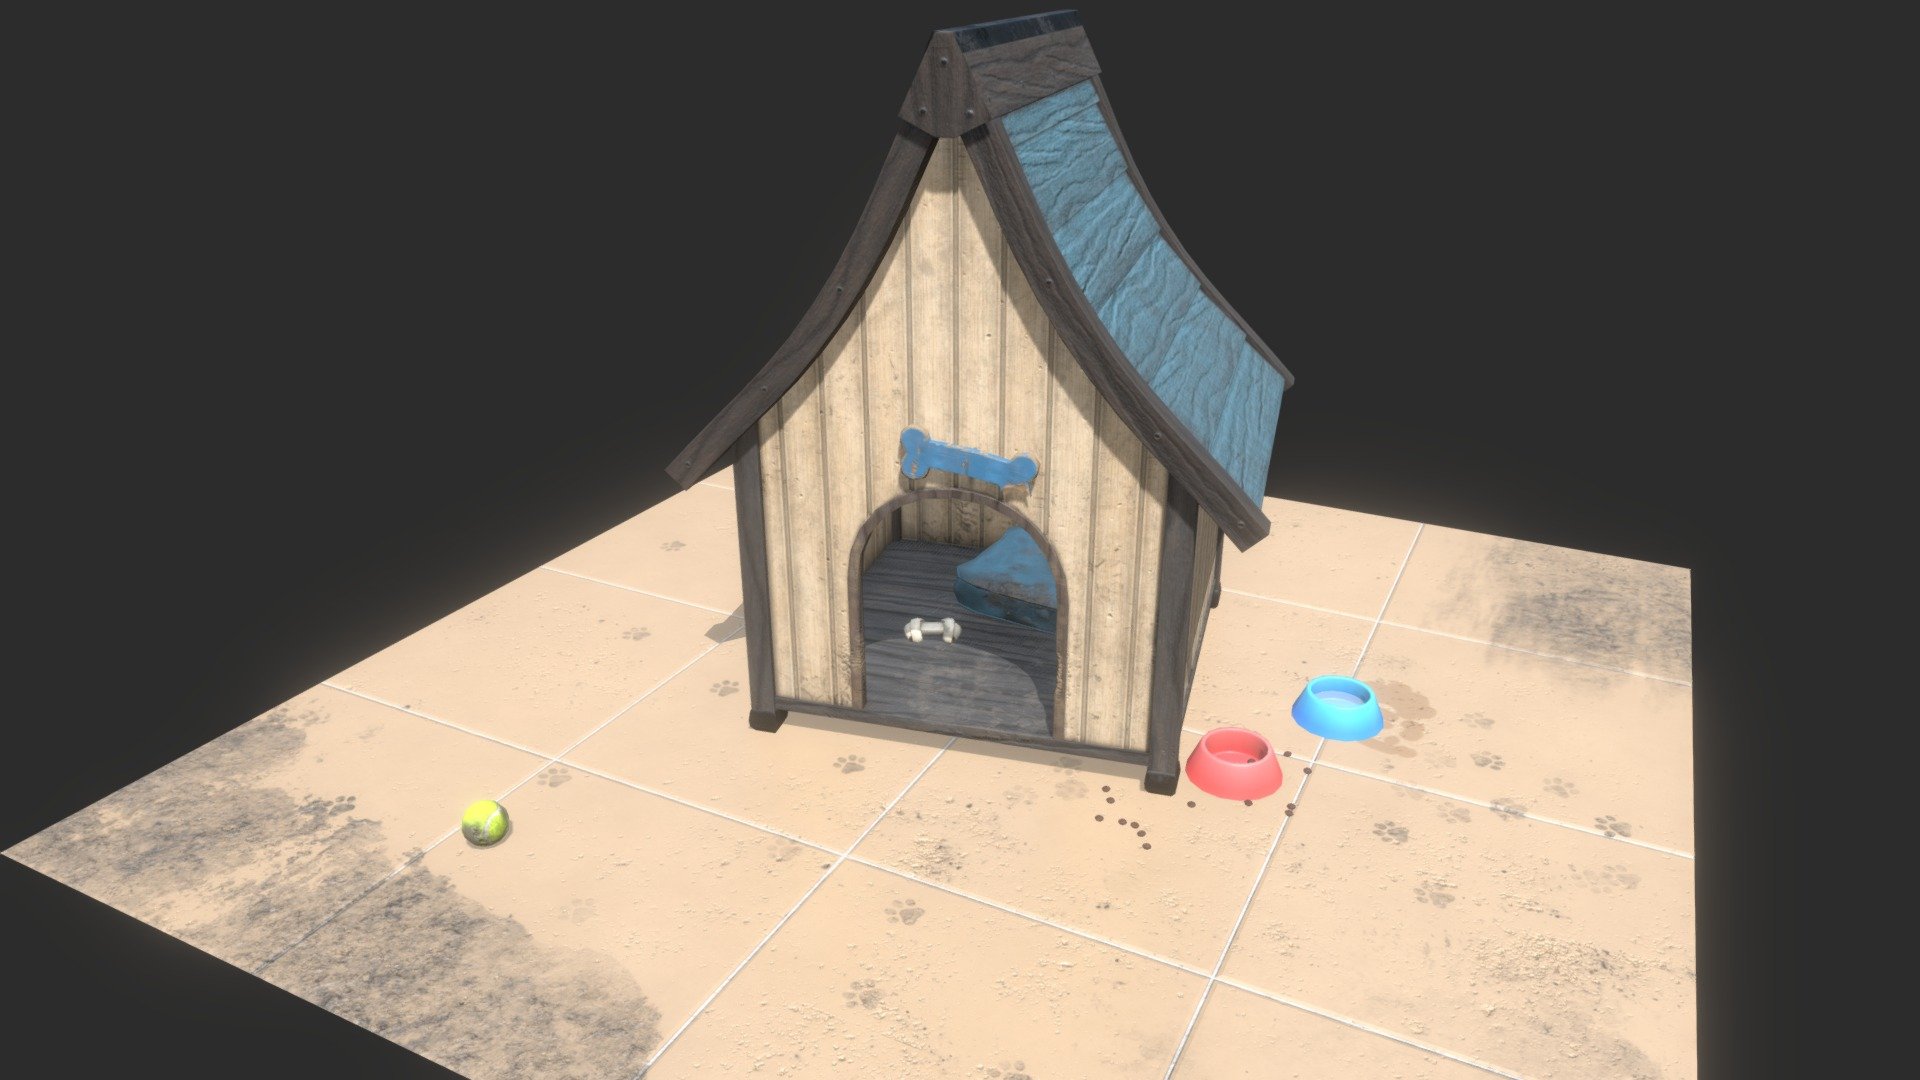 Happy medium dog lives in this house. It's useless trying to keep it clean: 2 hours later it's all dirty and messy again.

Blender and Substance Painter used 3d model